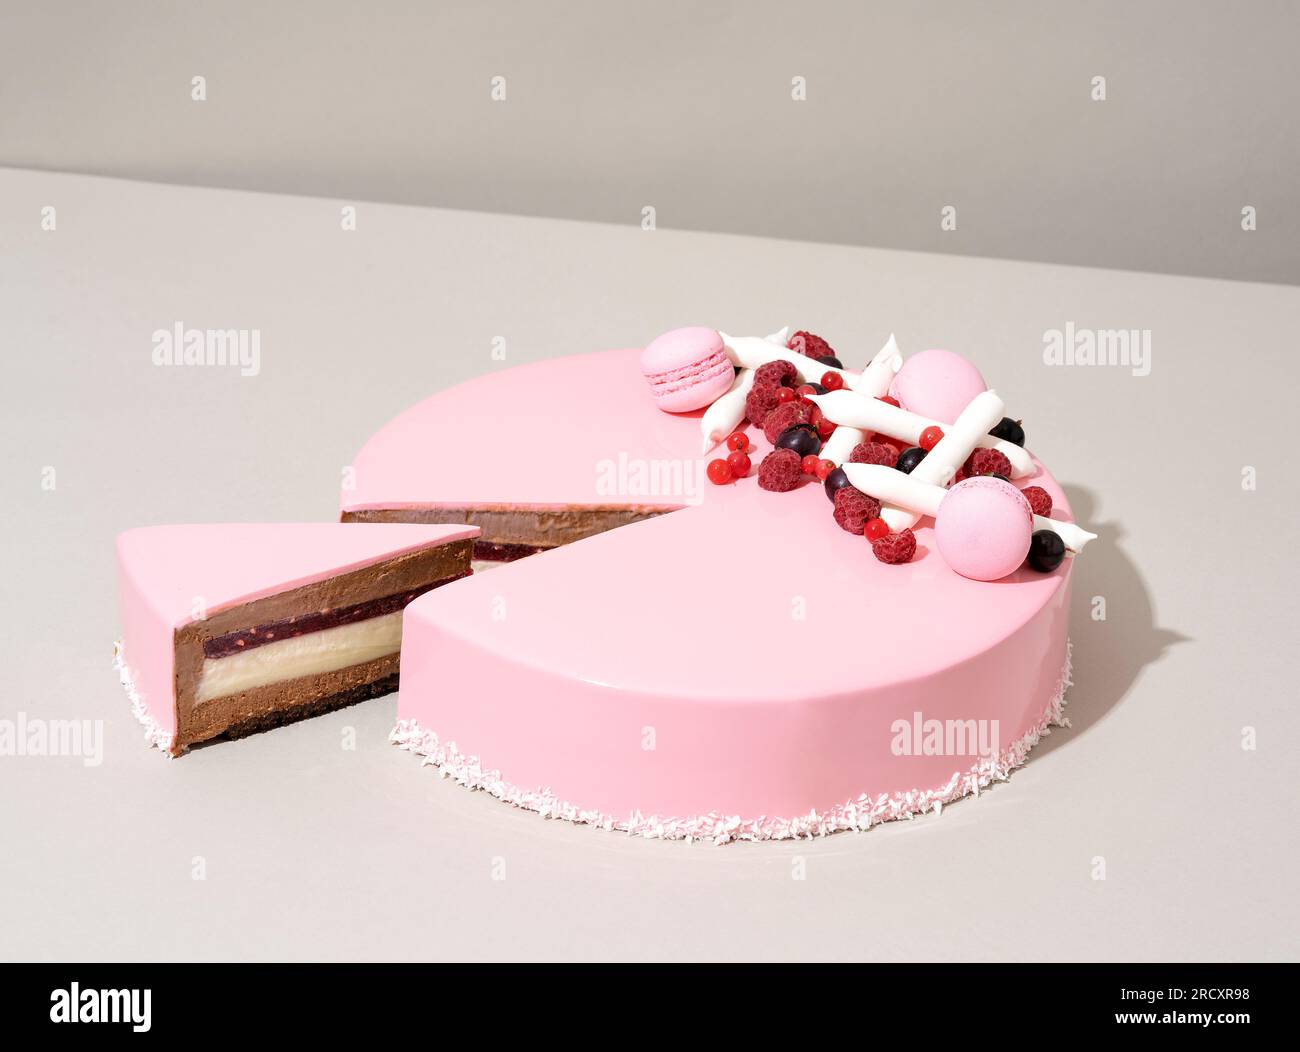 A close-up shot of a delectable cake featuring a raspberry and white chocolate topping Stock Photo